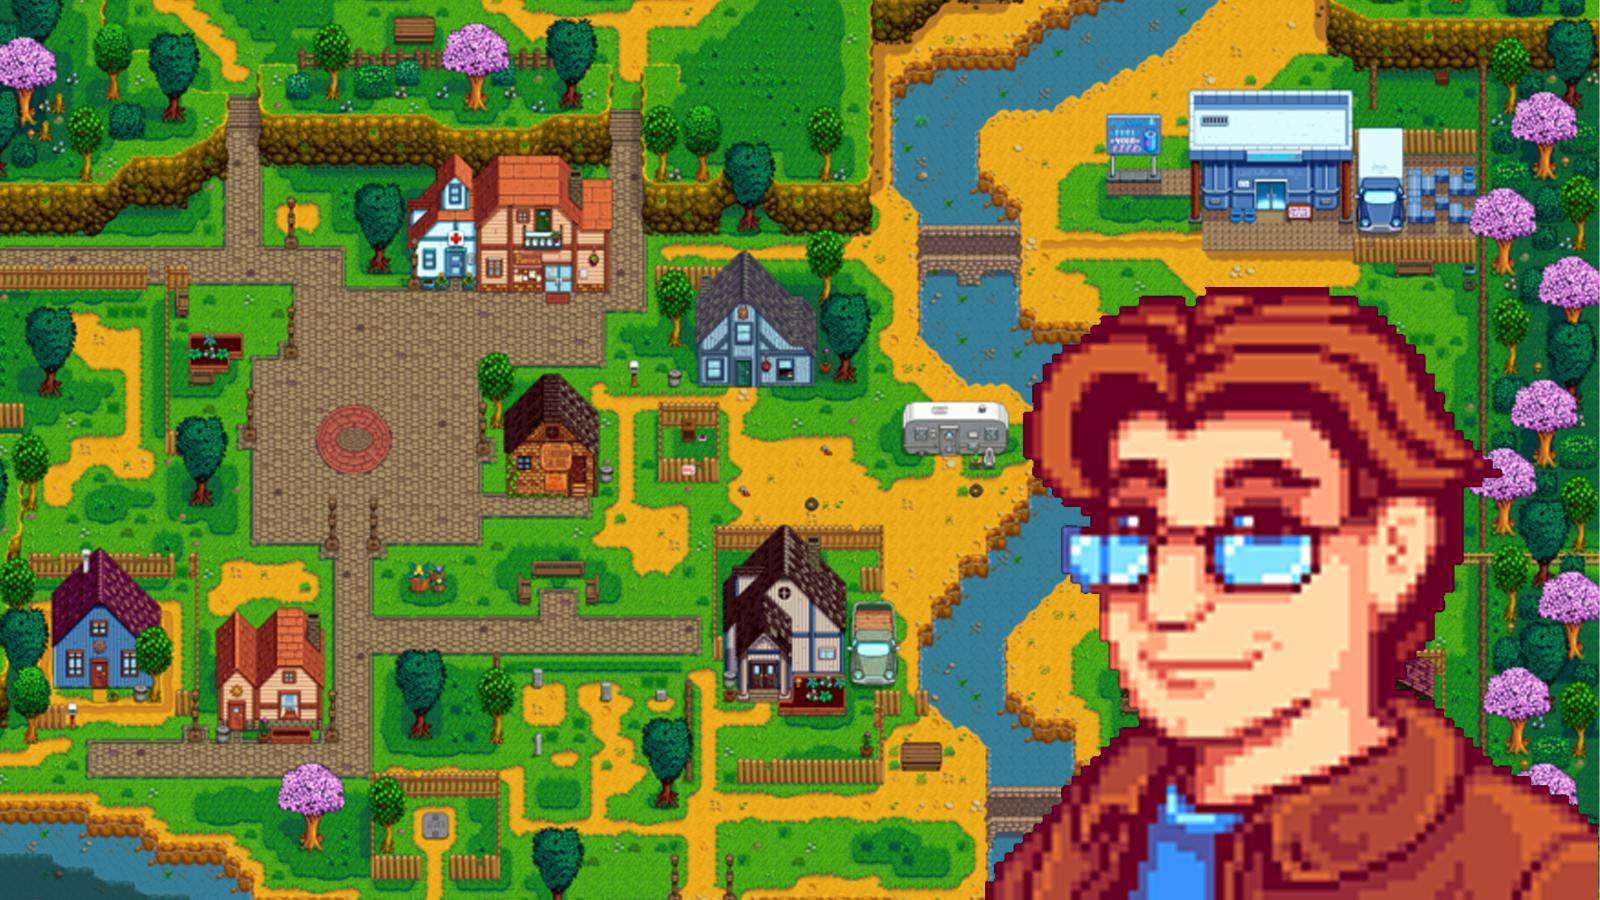 Pierre's portrait superimposed over a map of Pelican Town from Stardew Valley